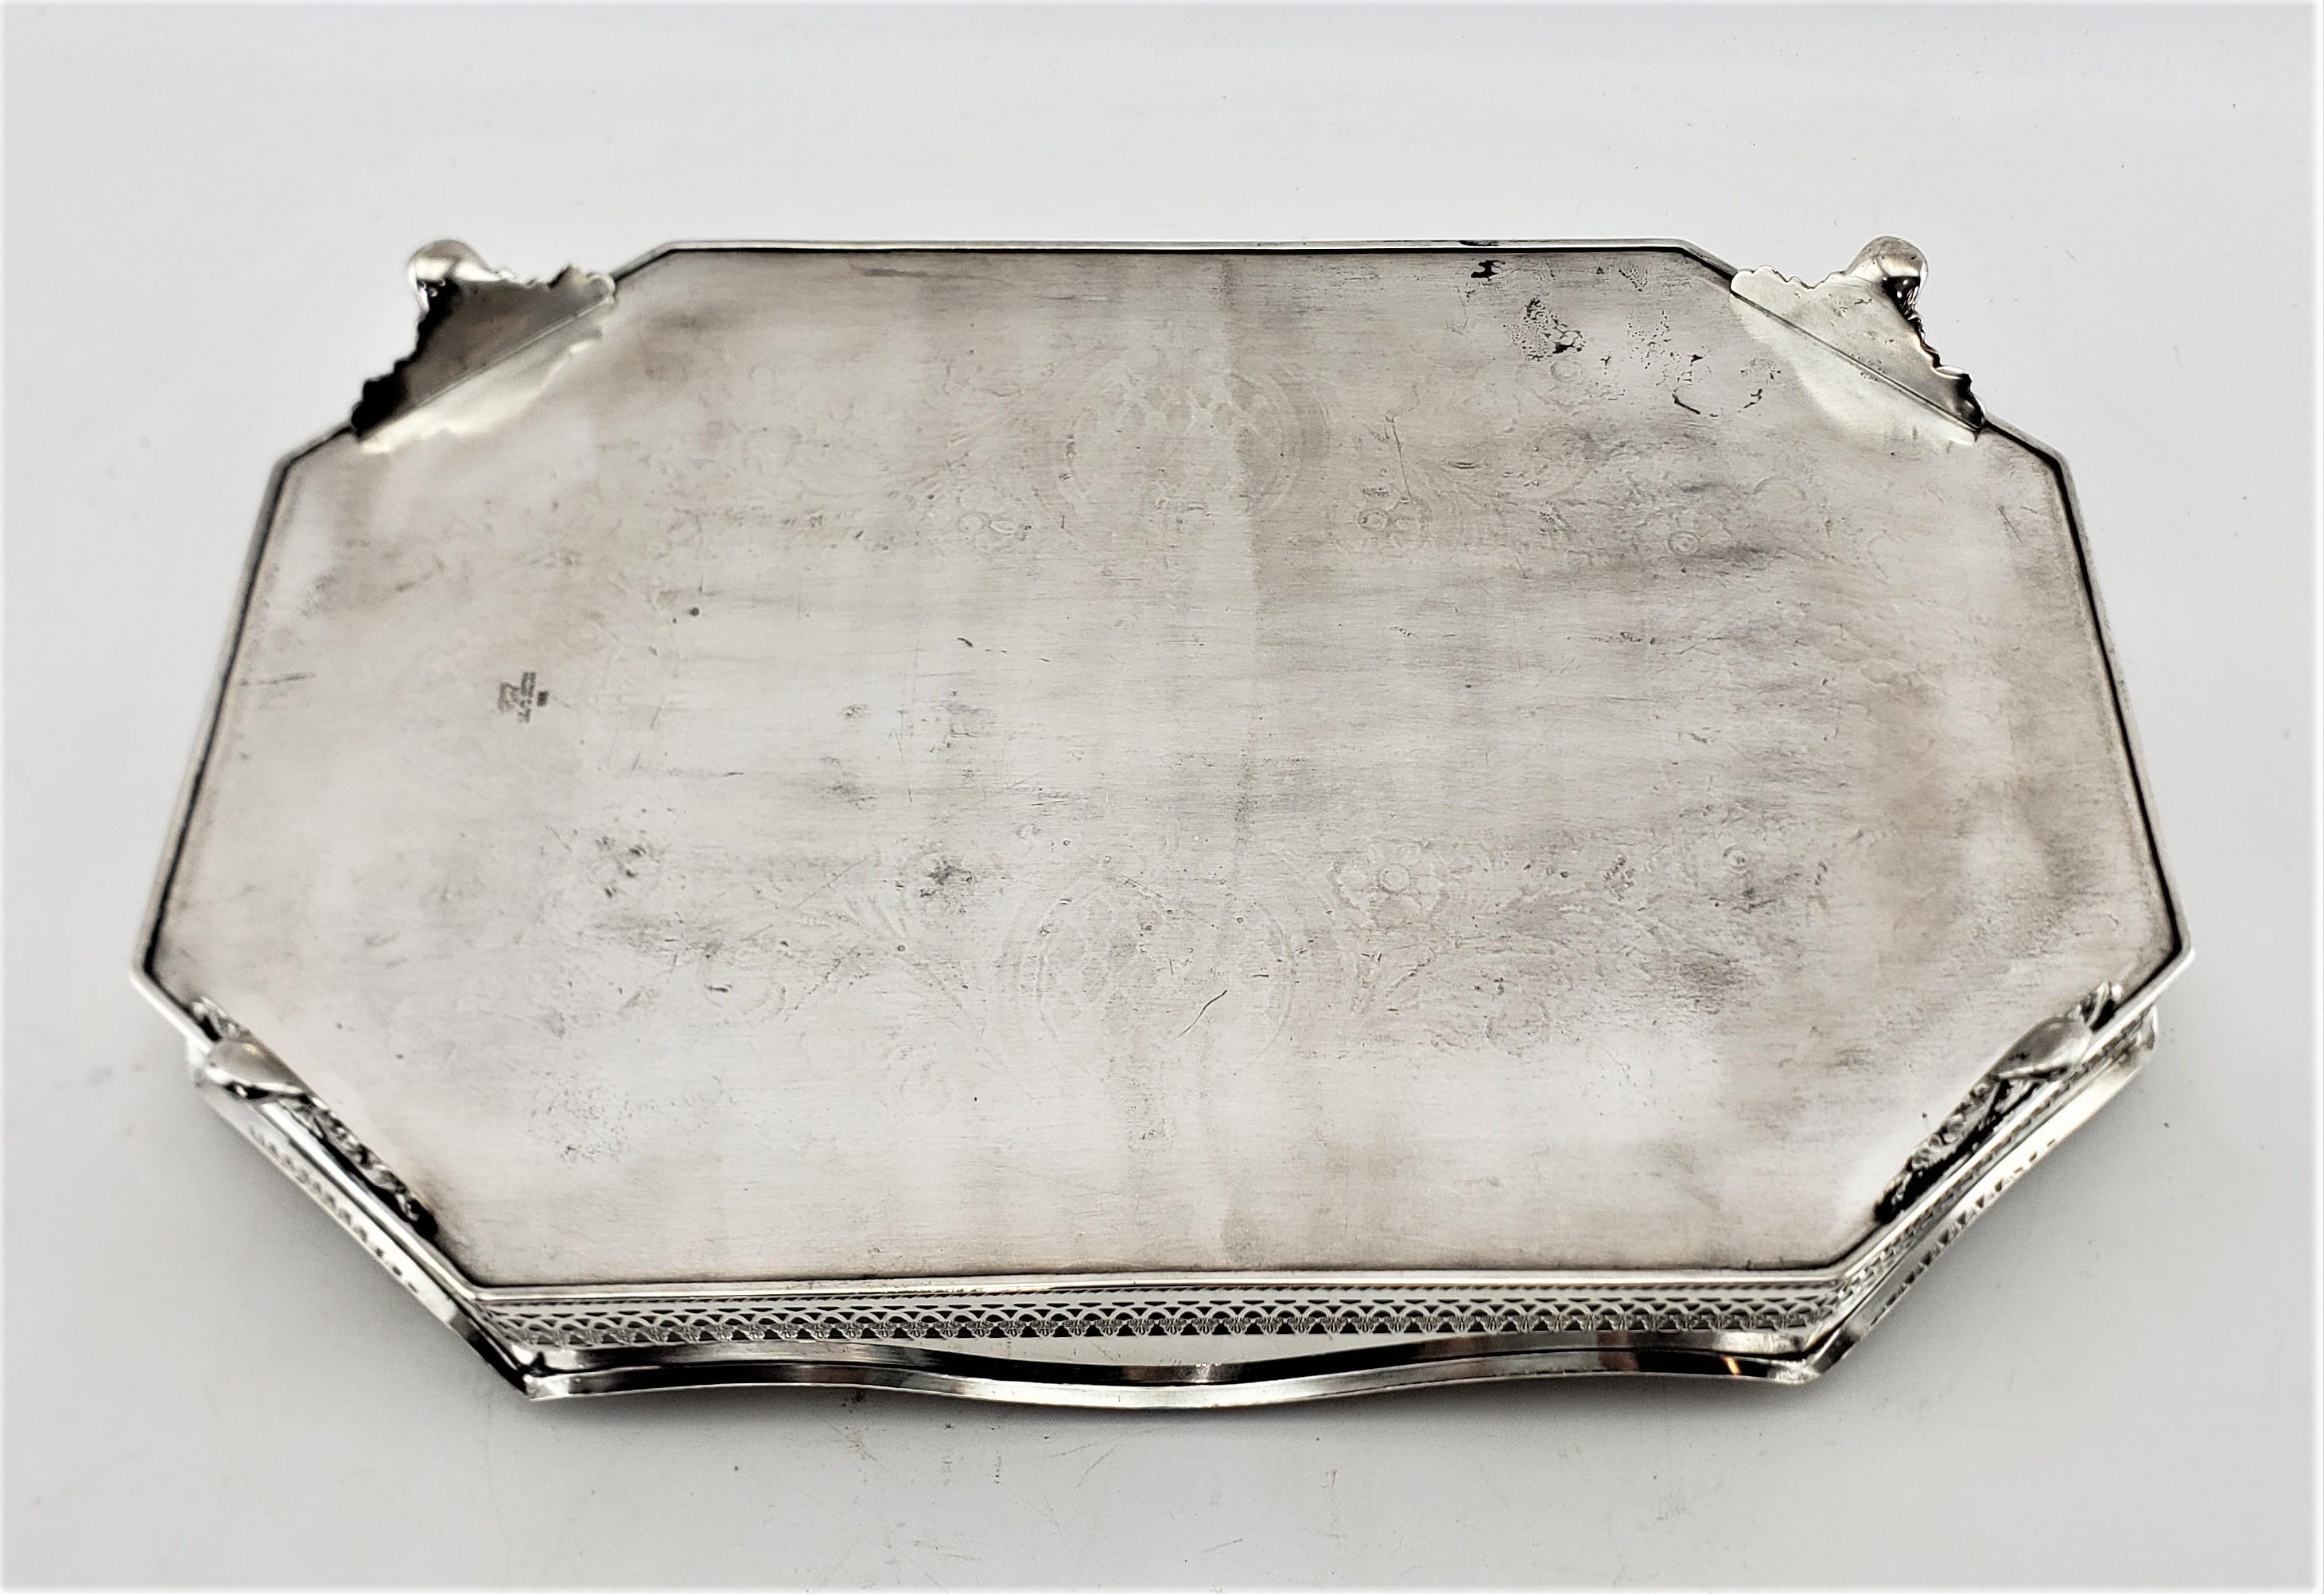 Antique English Silver Plated Footed Gallery Serving Tray with Ornate Engraving 5